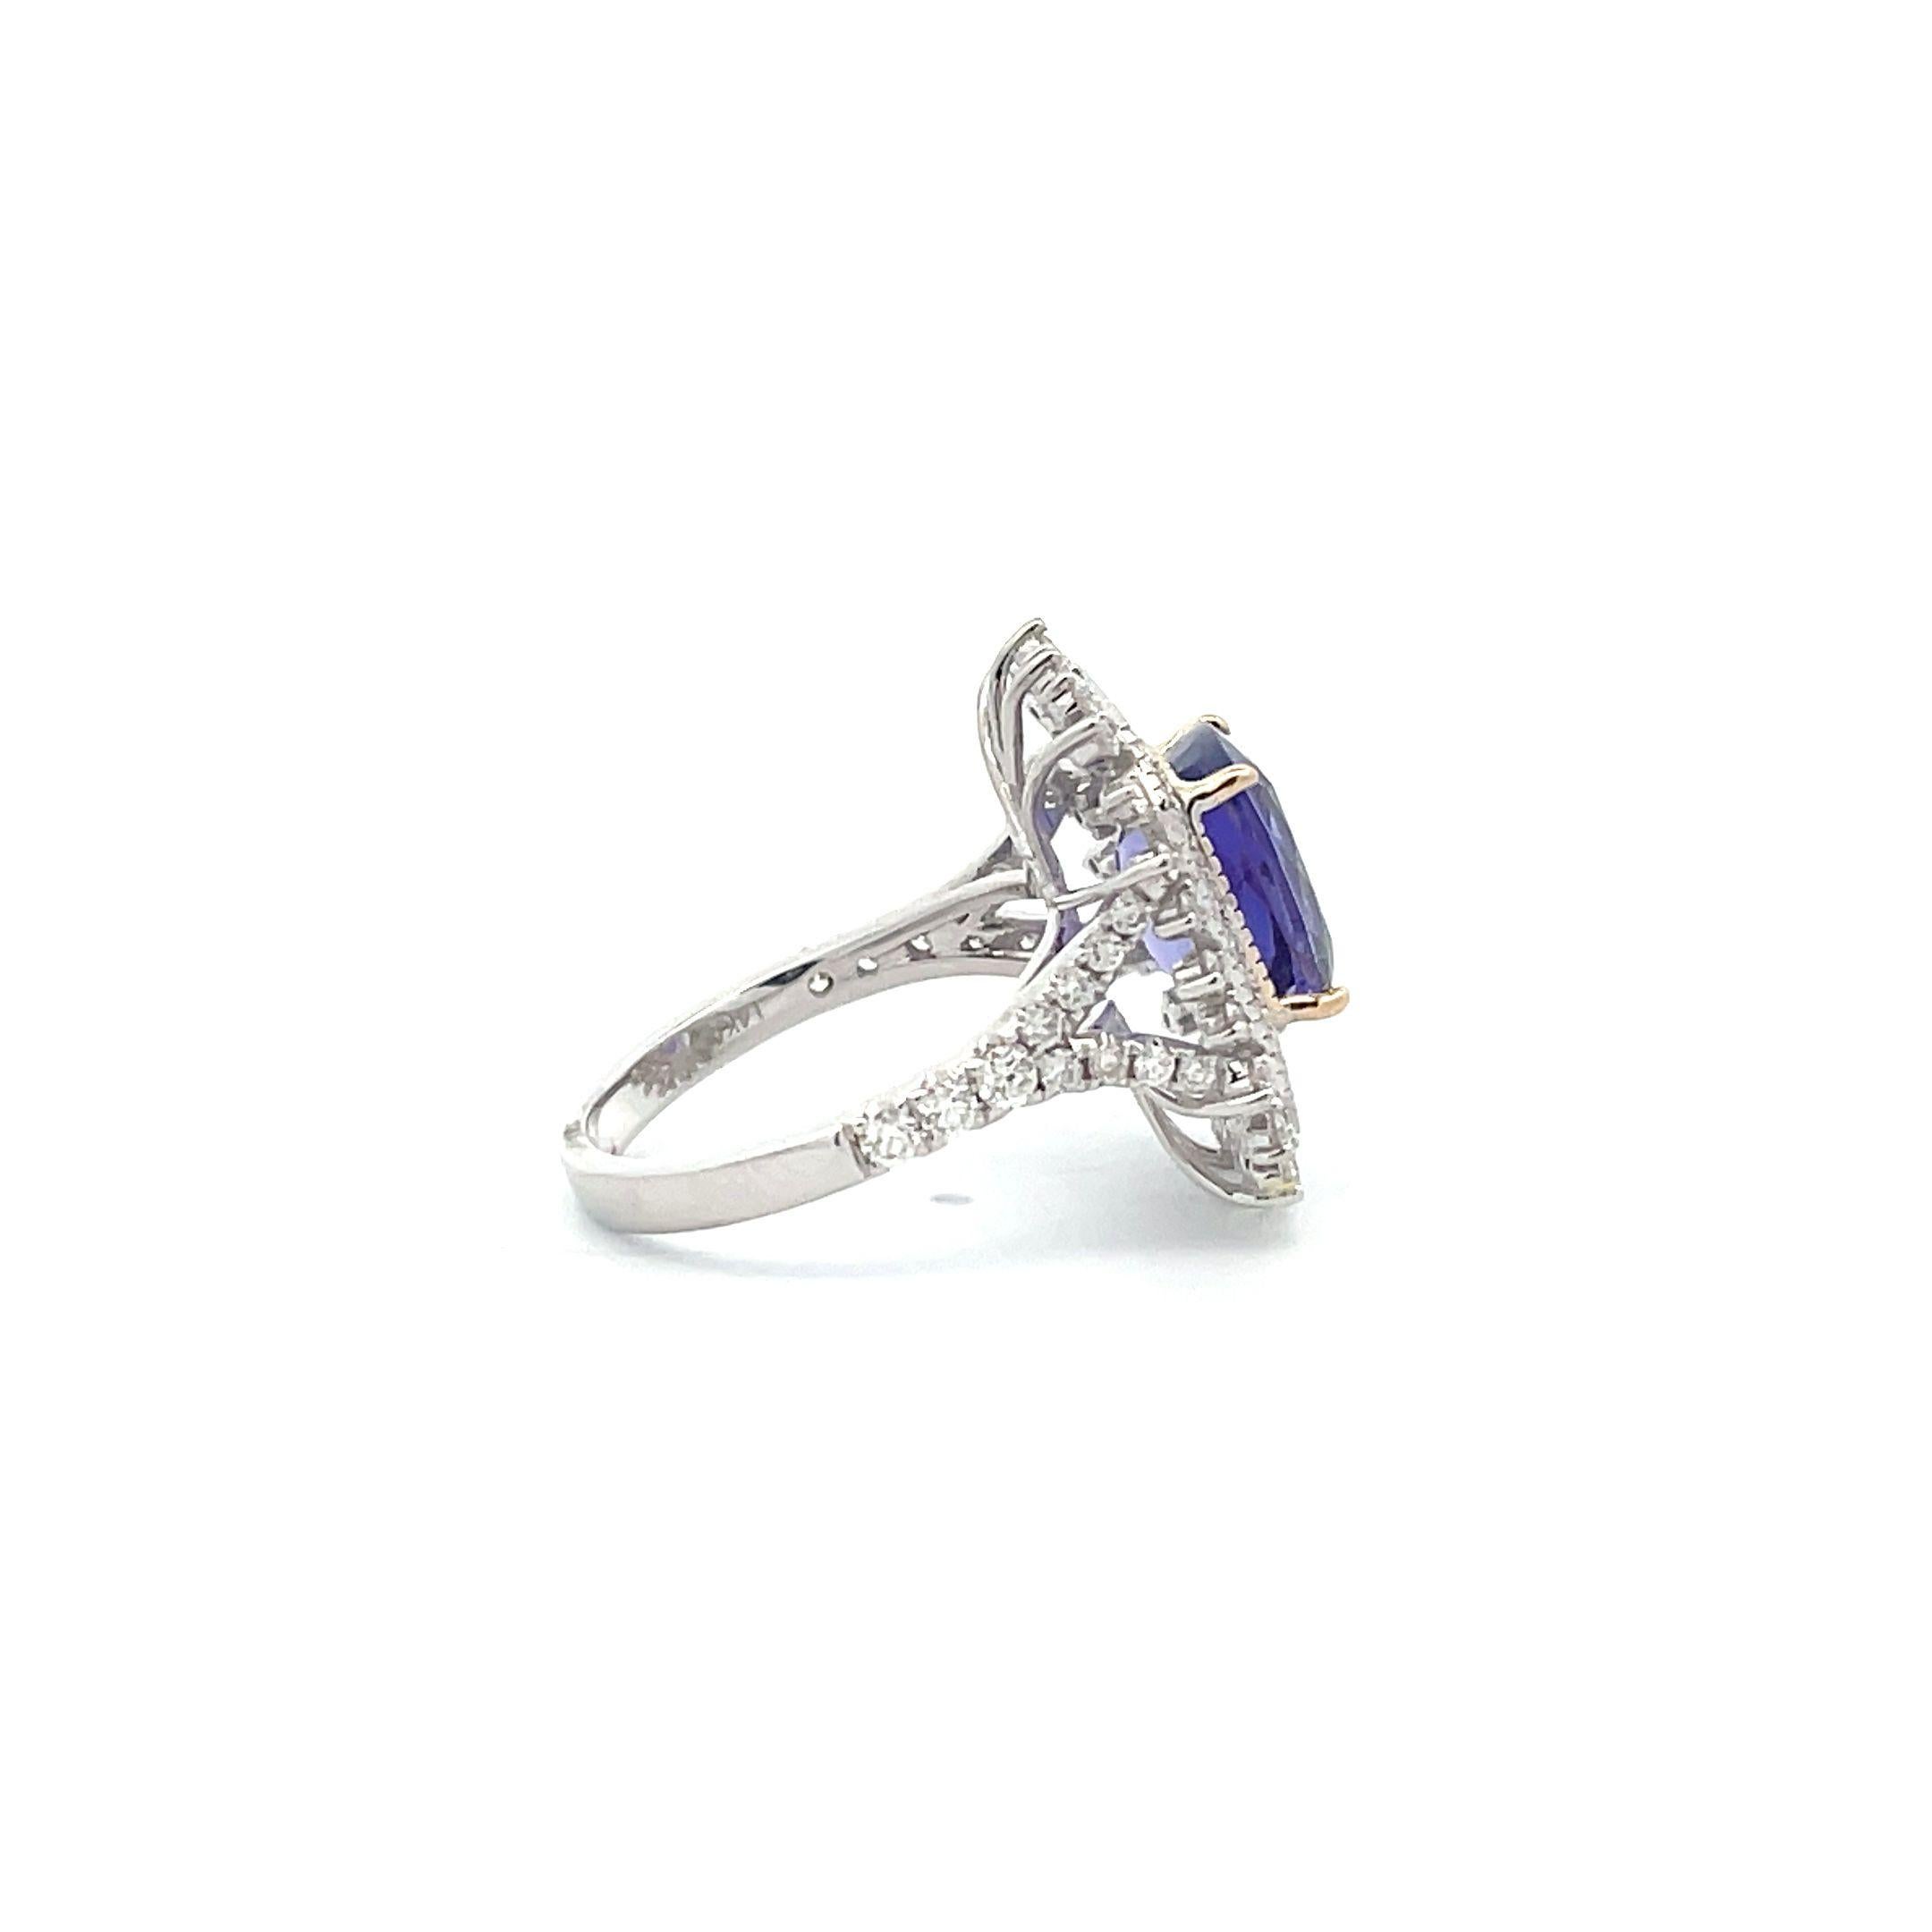 A delicate combination of 3.92 ct. cushion-cut Tanzanite, and a 0.99 ct. Diamond halo makes this Edwardian engagement ring with diamond accents a stunning choice for your special day! Beautifully crafted by professional artisans using 14K White Gold